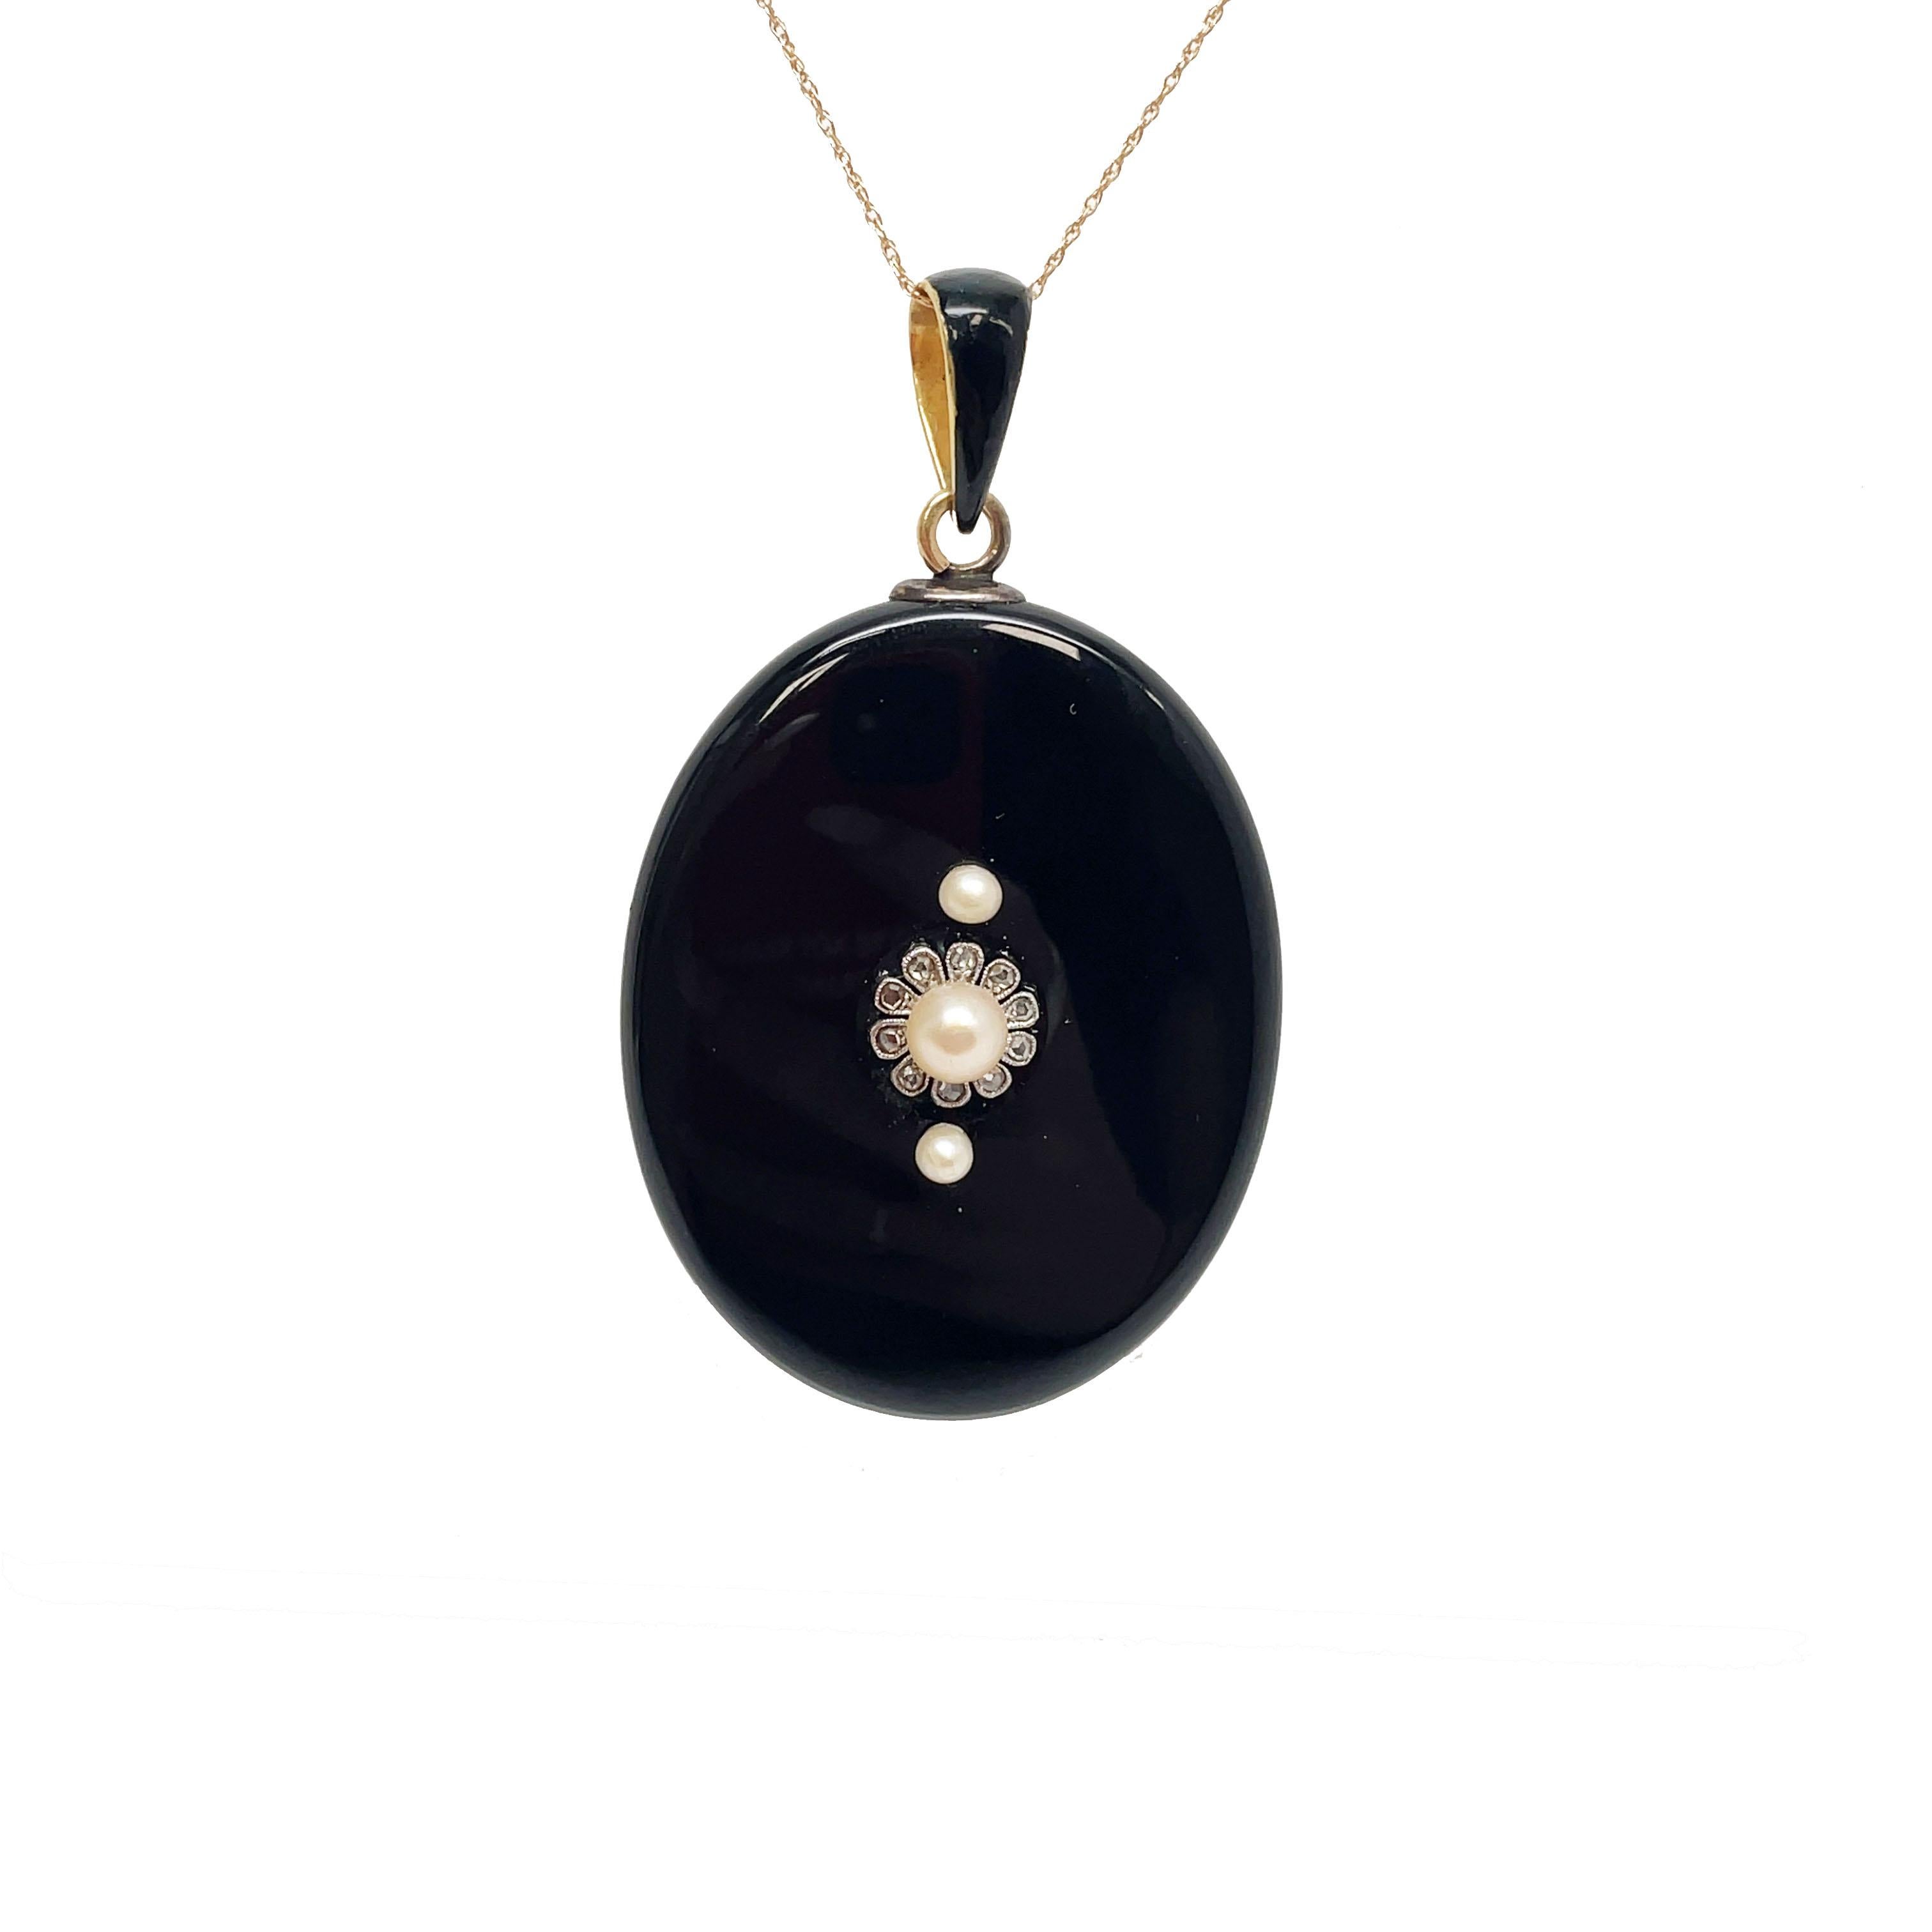 This is a spectacular 1890 Victorian Black Onyx, Diamond, and Pearl Locket! This locket features 10 lovely rose-cut diamonds that surround one of the pearls in a lovely petal-like pattern. The locket is composed of Black Onyx and has an enamel bail